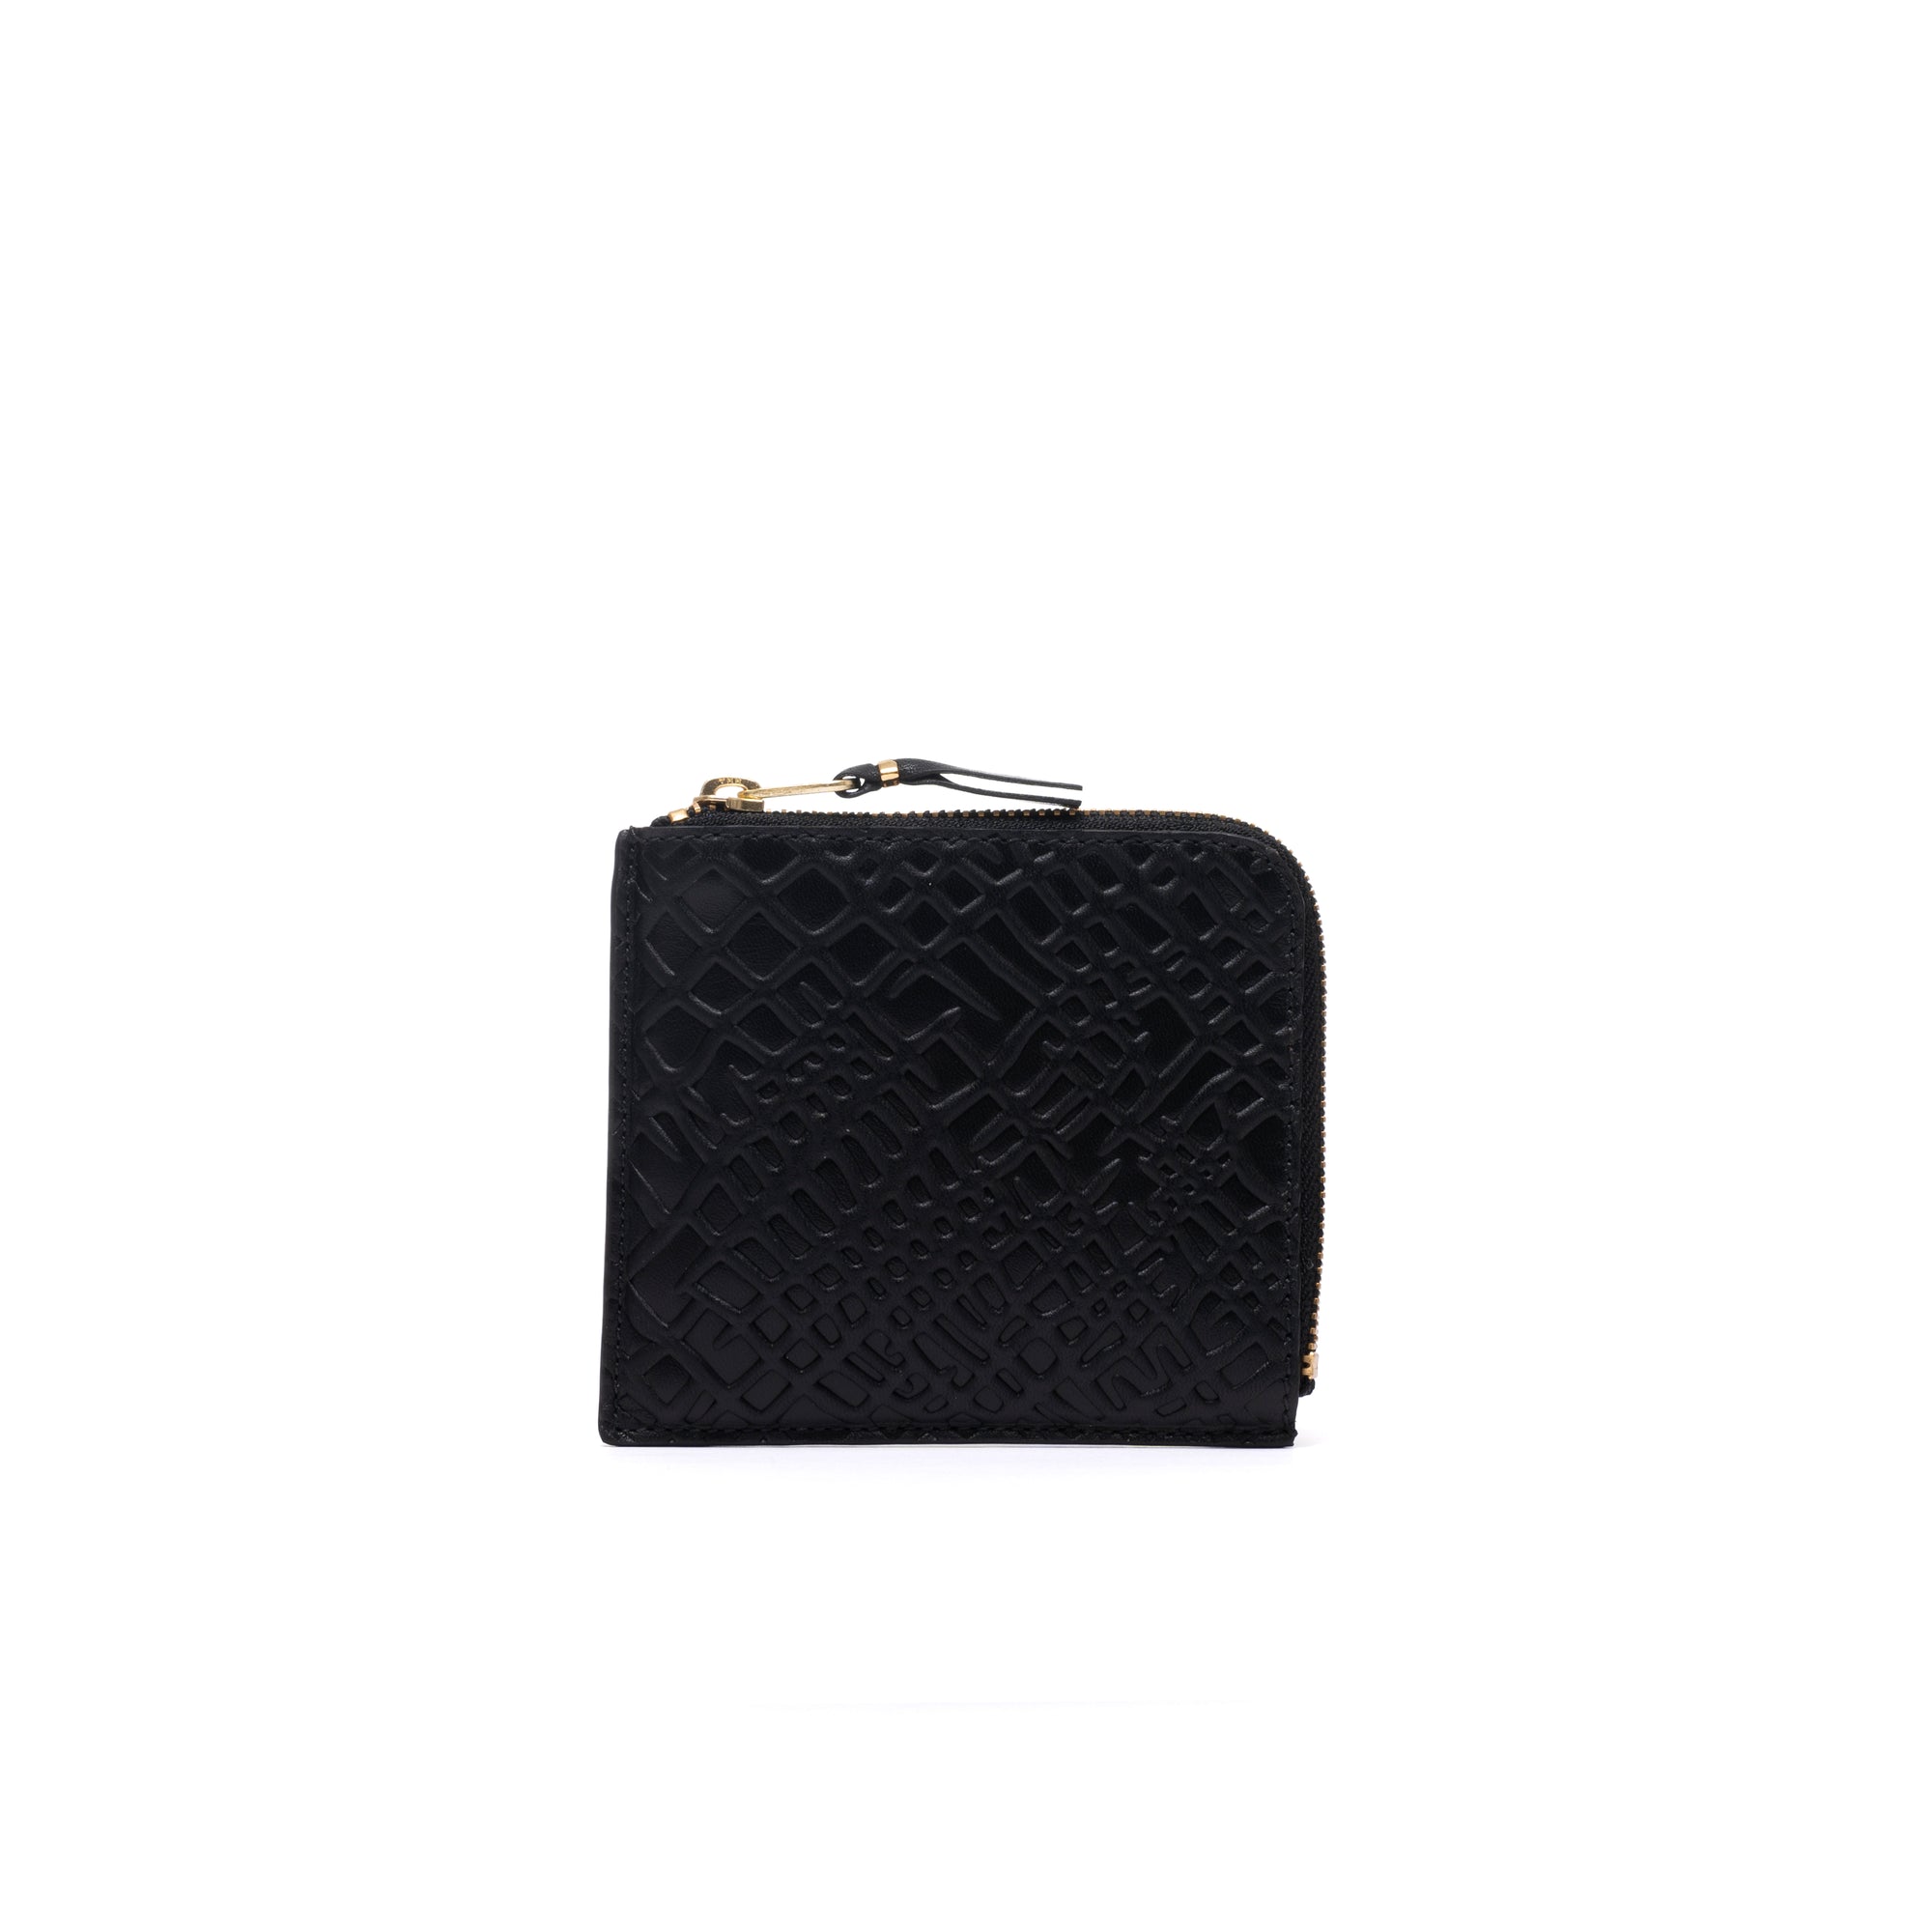 CDG WALLET - Embossed Roots - (SA3100ER Black) view 1